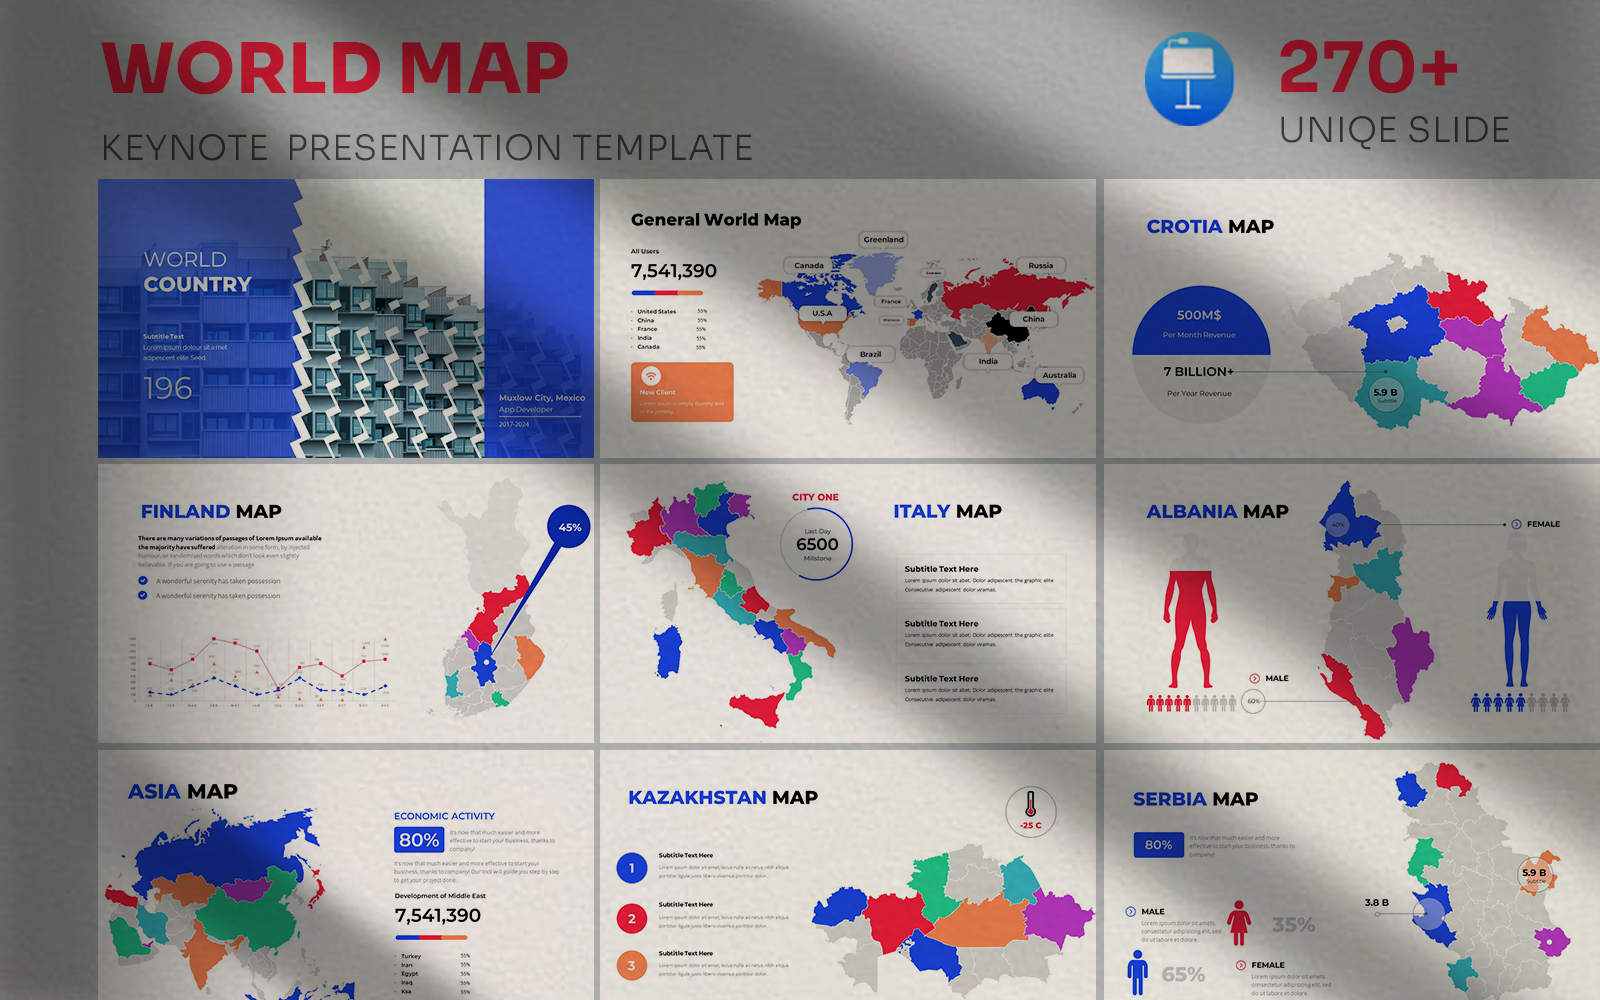 World Map | All Country Map Keynote Presentation Template